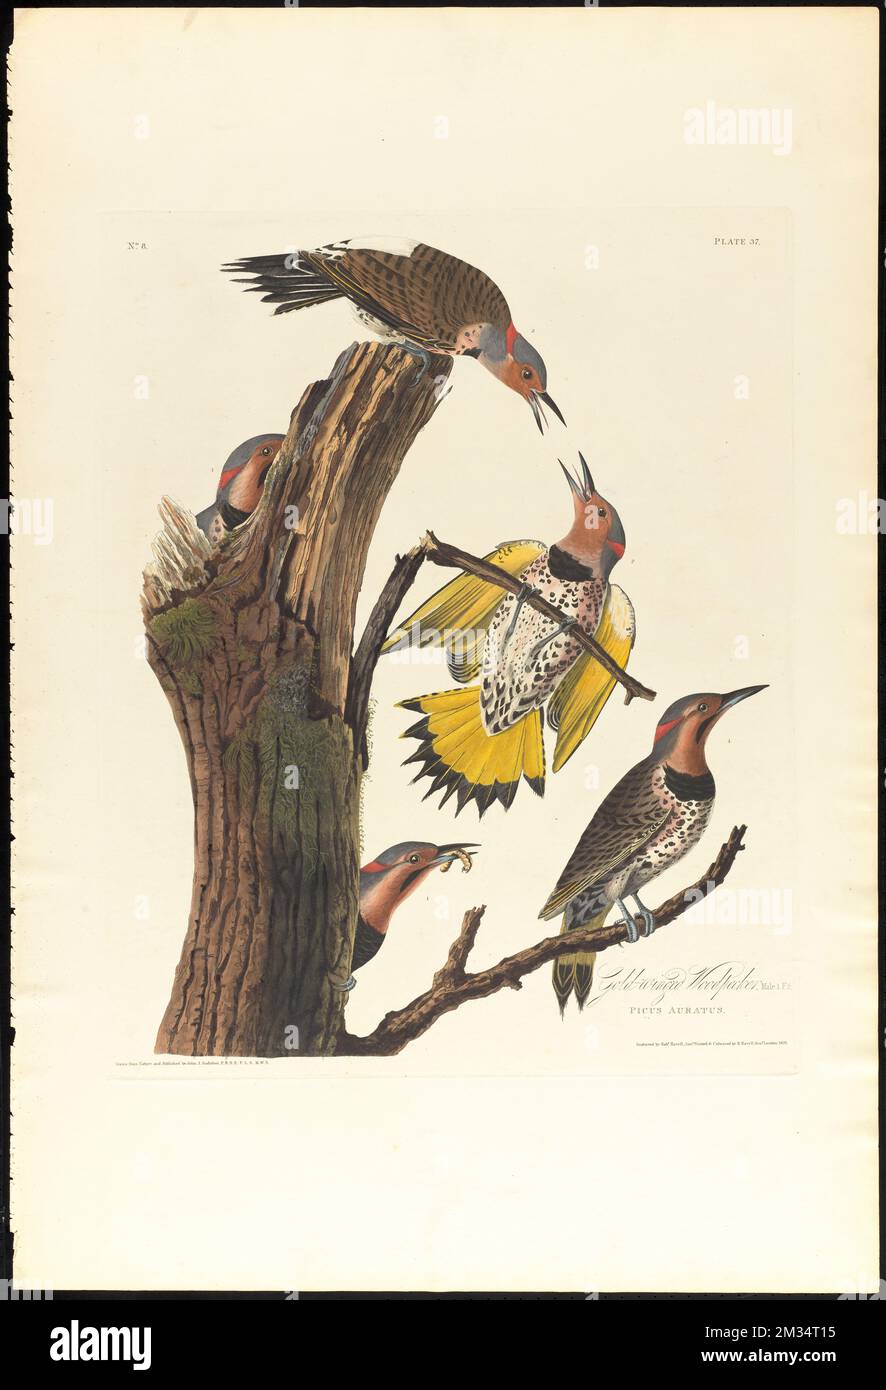 Gold-winged woodpecker : Male, 1. F, 2. Picus auratus. c.2 v.1 plate 37 , Woodpeckers, Colaptes auratus. The Birds of America- From Original Drawings by John James Audubon Stock Photo